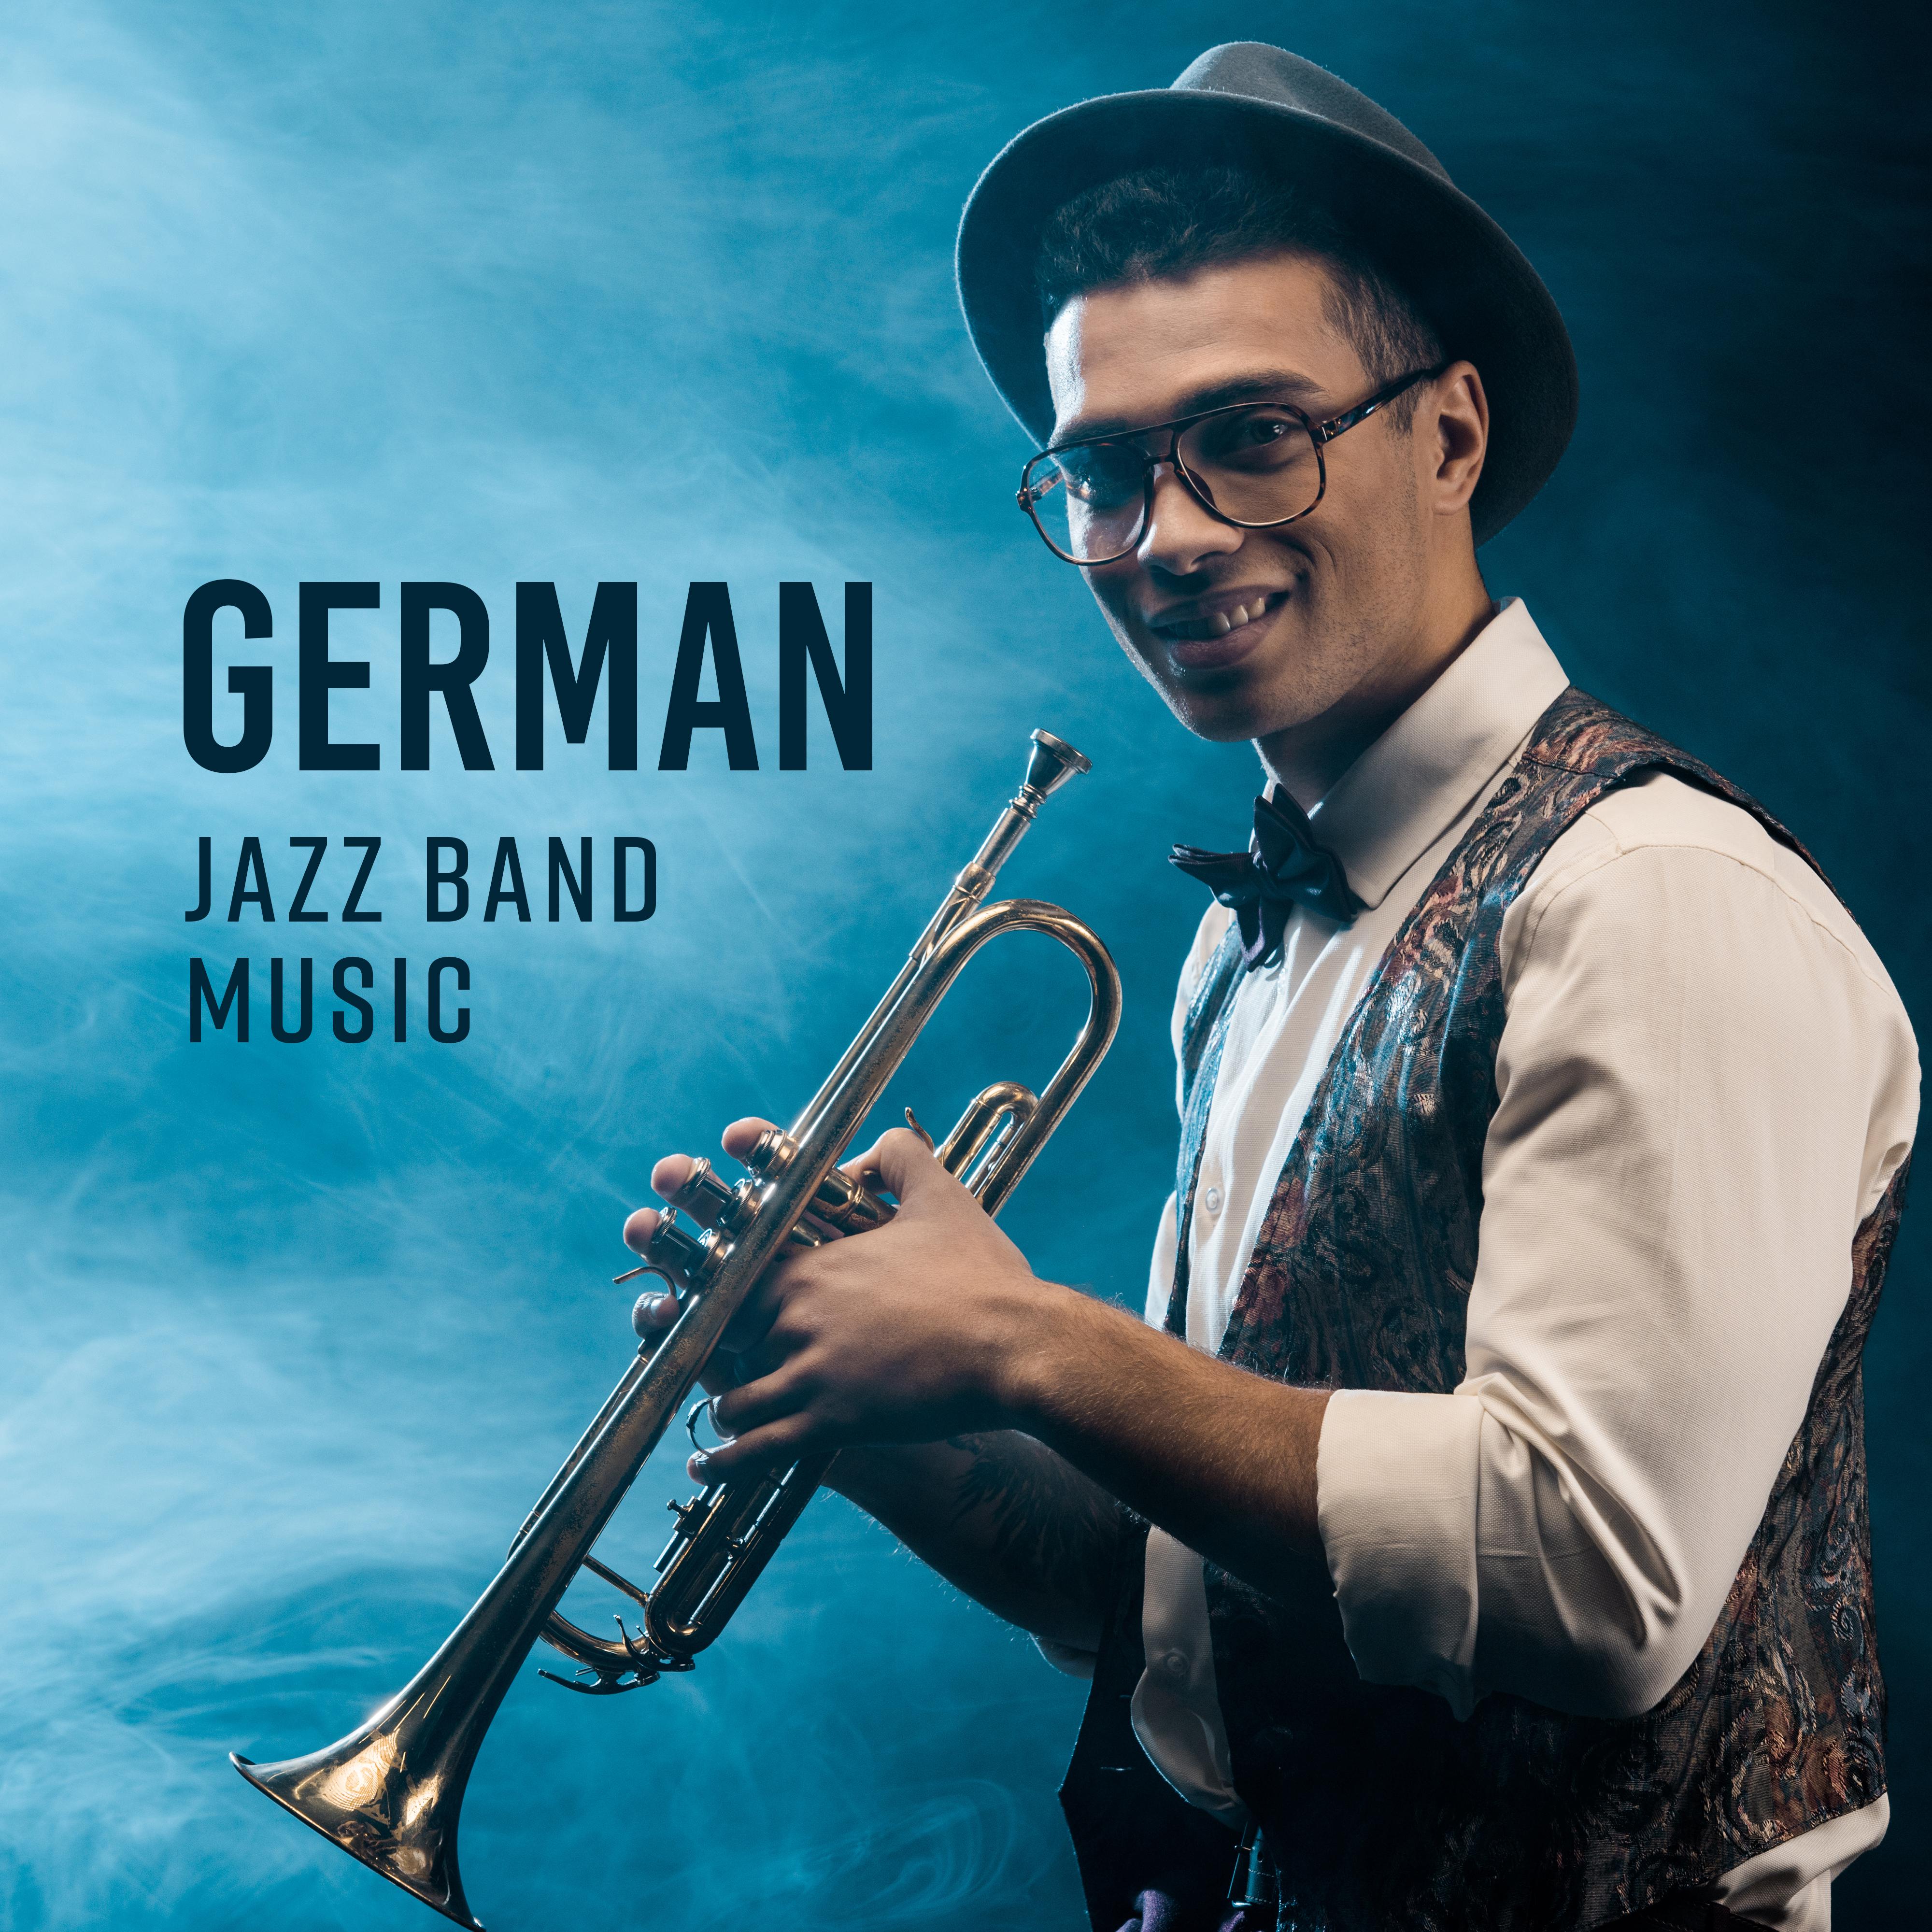 German Jazz Band Music  2019 Instrumental Smooth Jazz Collection, Vintage Melodies with Sounds of Piano, Trumpet, Sax  Others